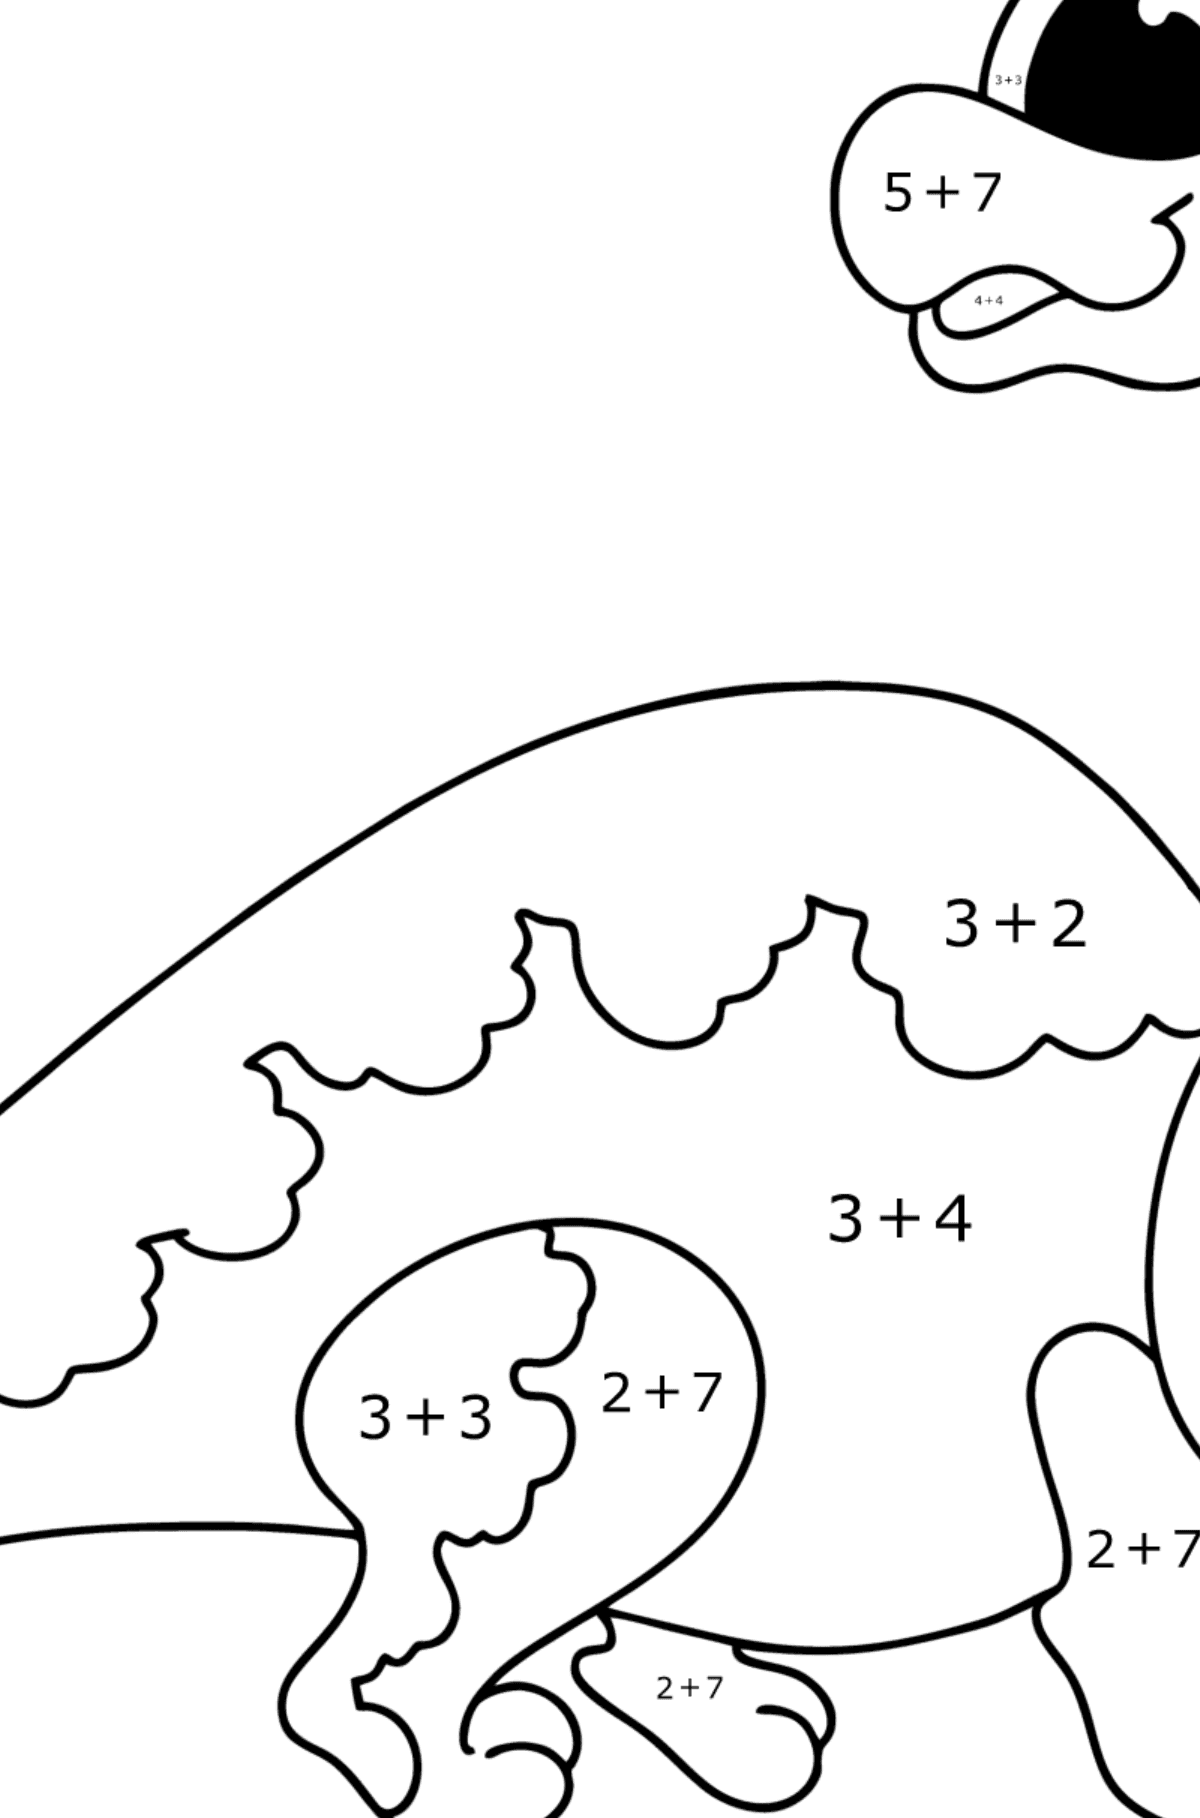 Brachiosaurus coloring page - Math Coloring - Addition for Kids